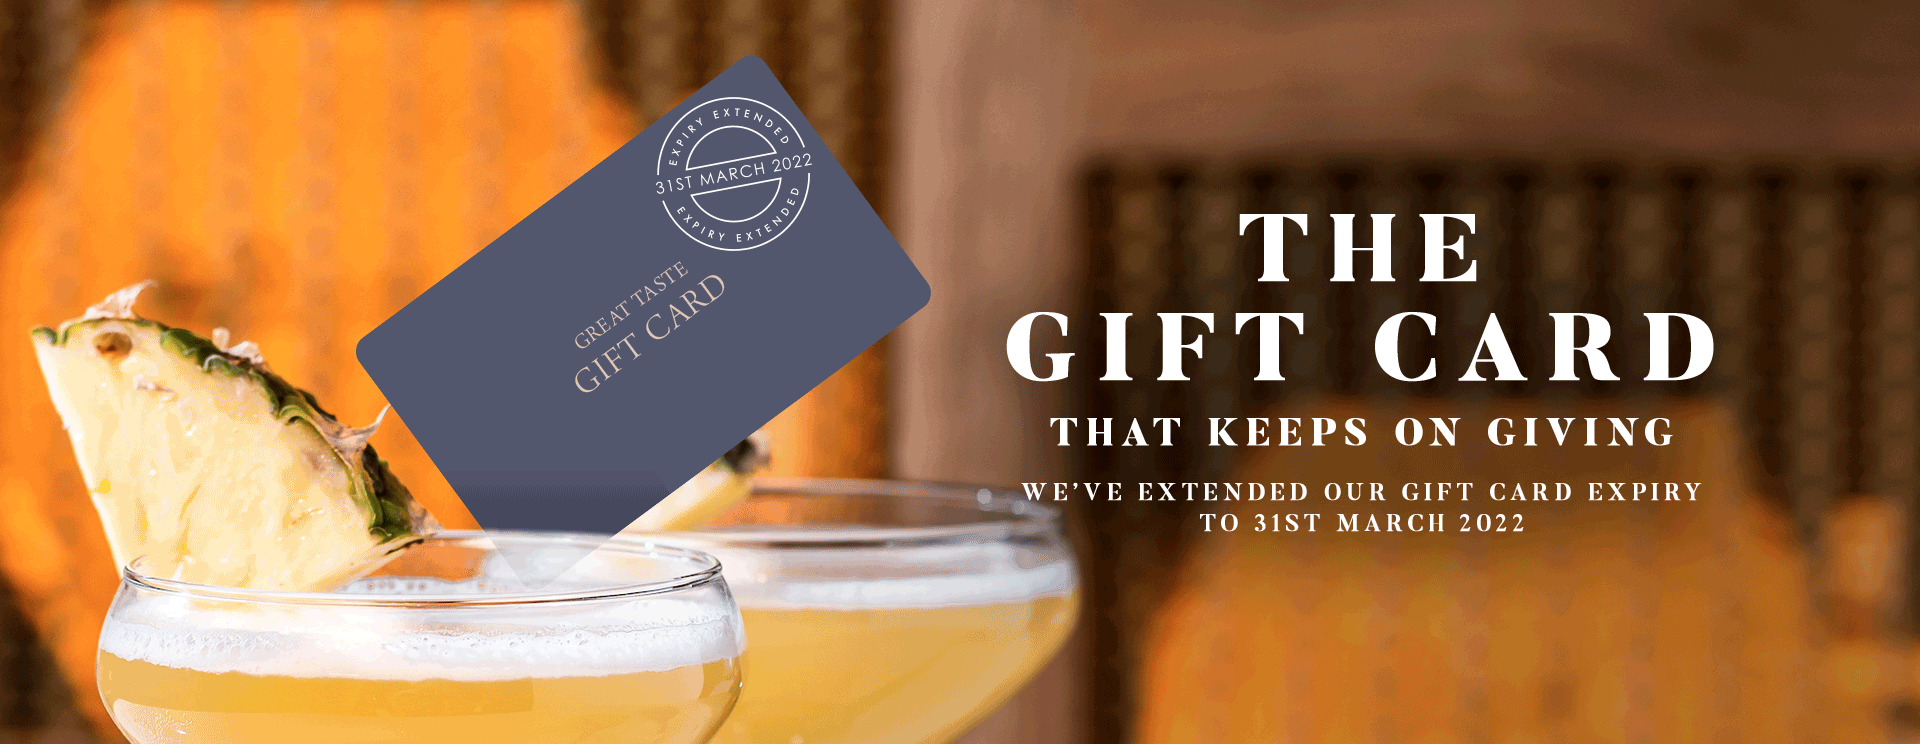 Give the gift of a gift card at The Gate